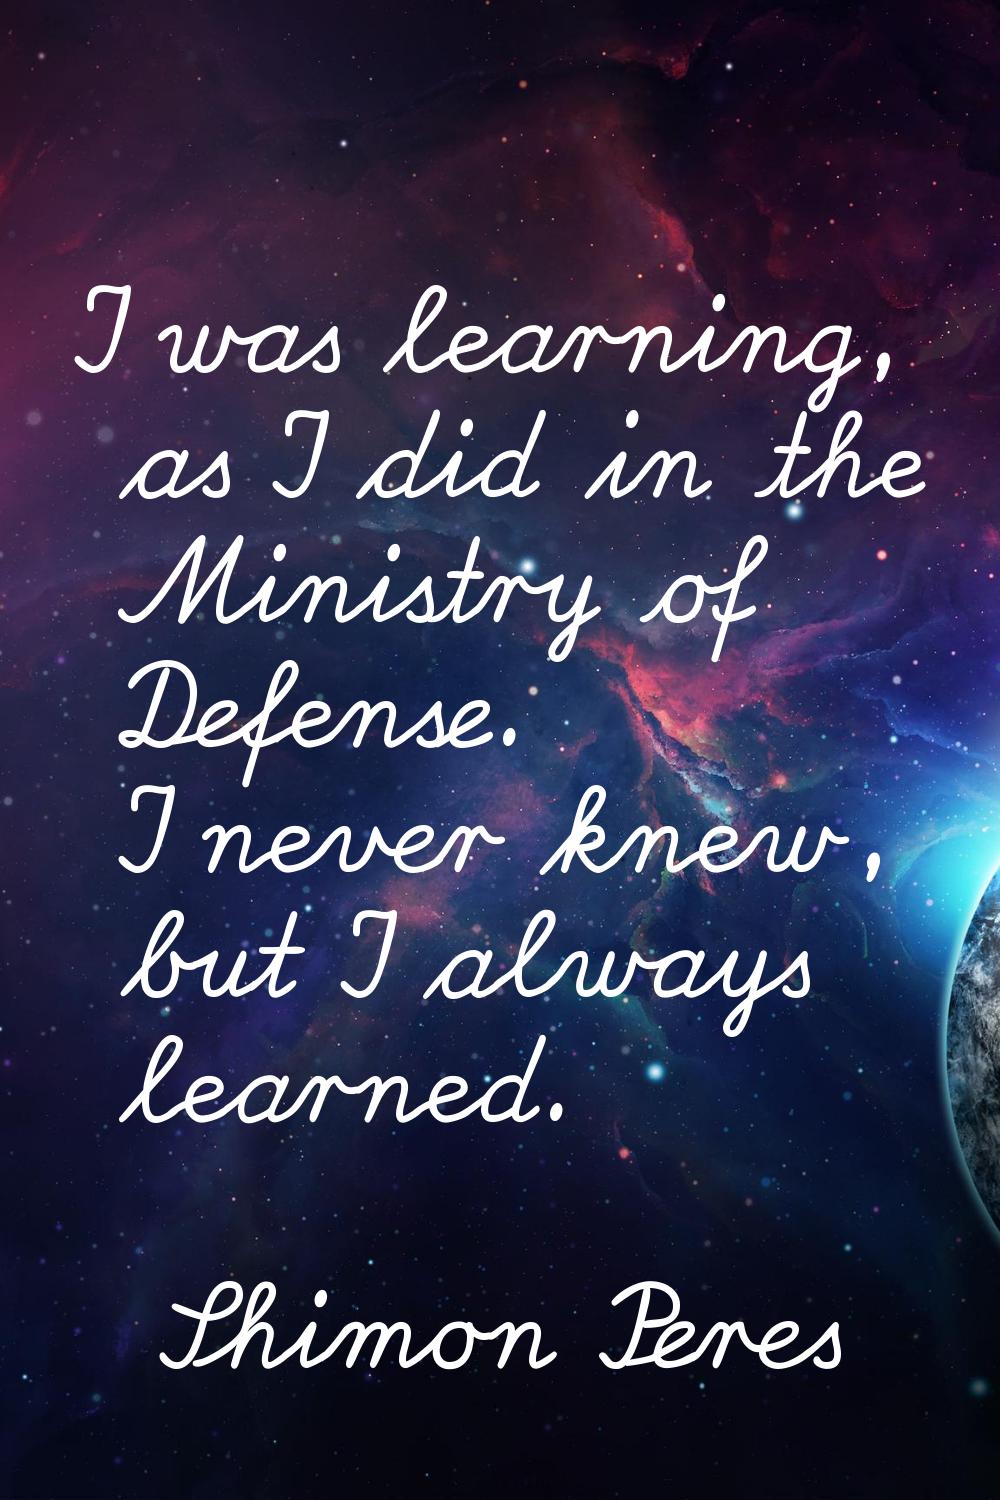 I was learning, as I did in the Ministry of Defense. I never knew, but I always learned.